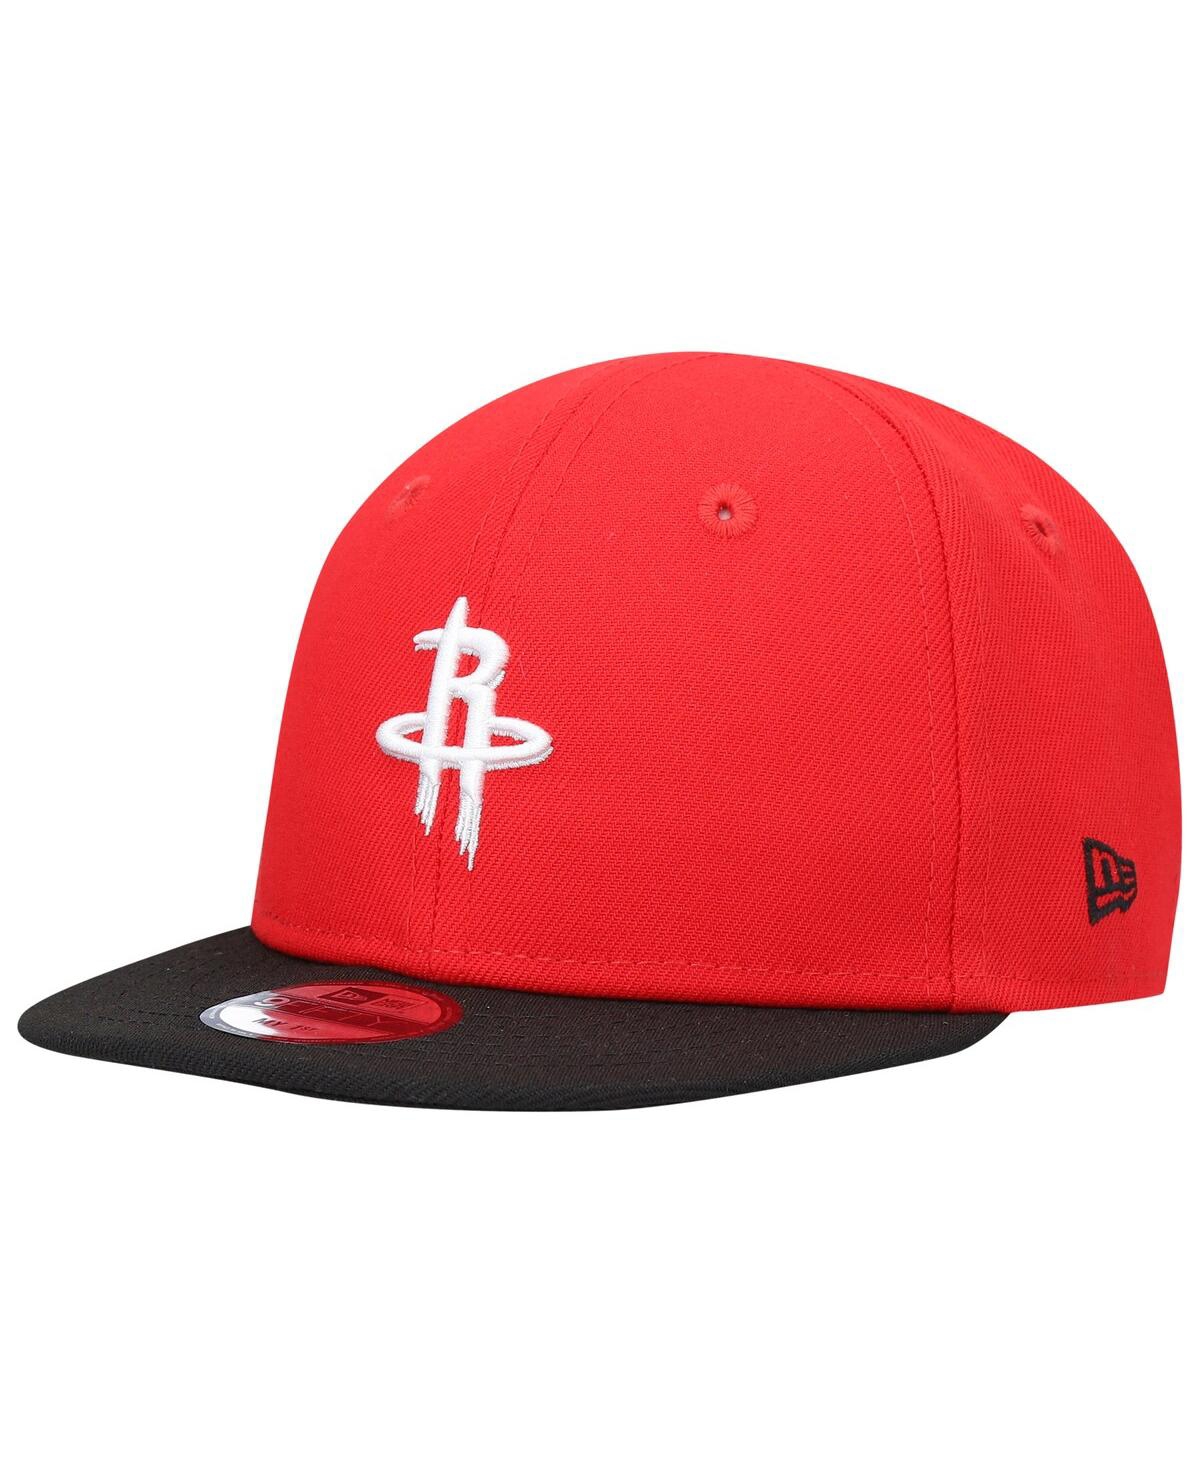 New Era Babies' Infant Unisex  Red, Black Houston Rockets My 1st 9fifty Adjustable Hat In Red,black